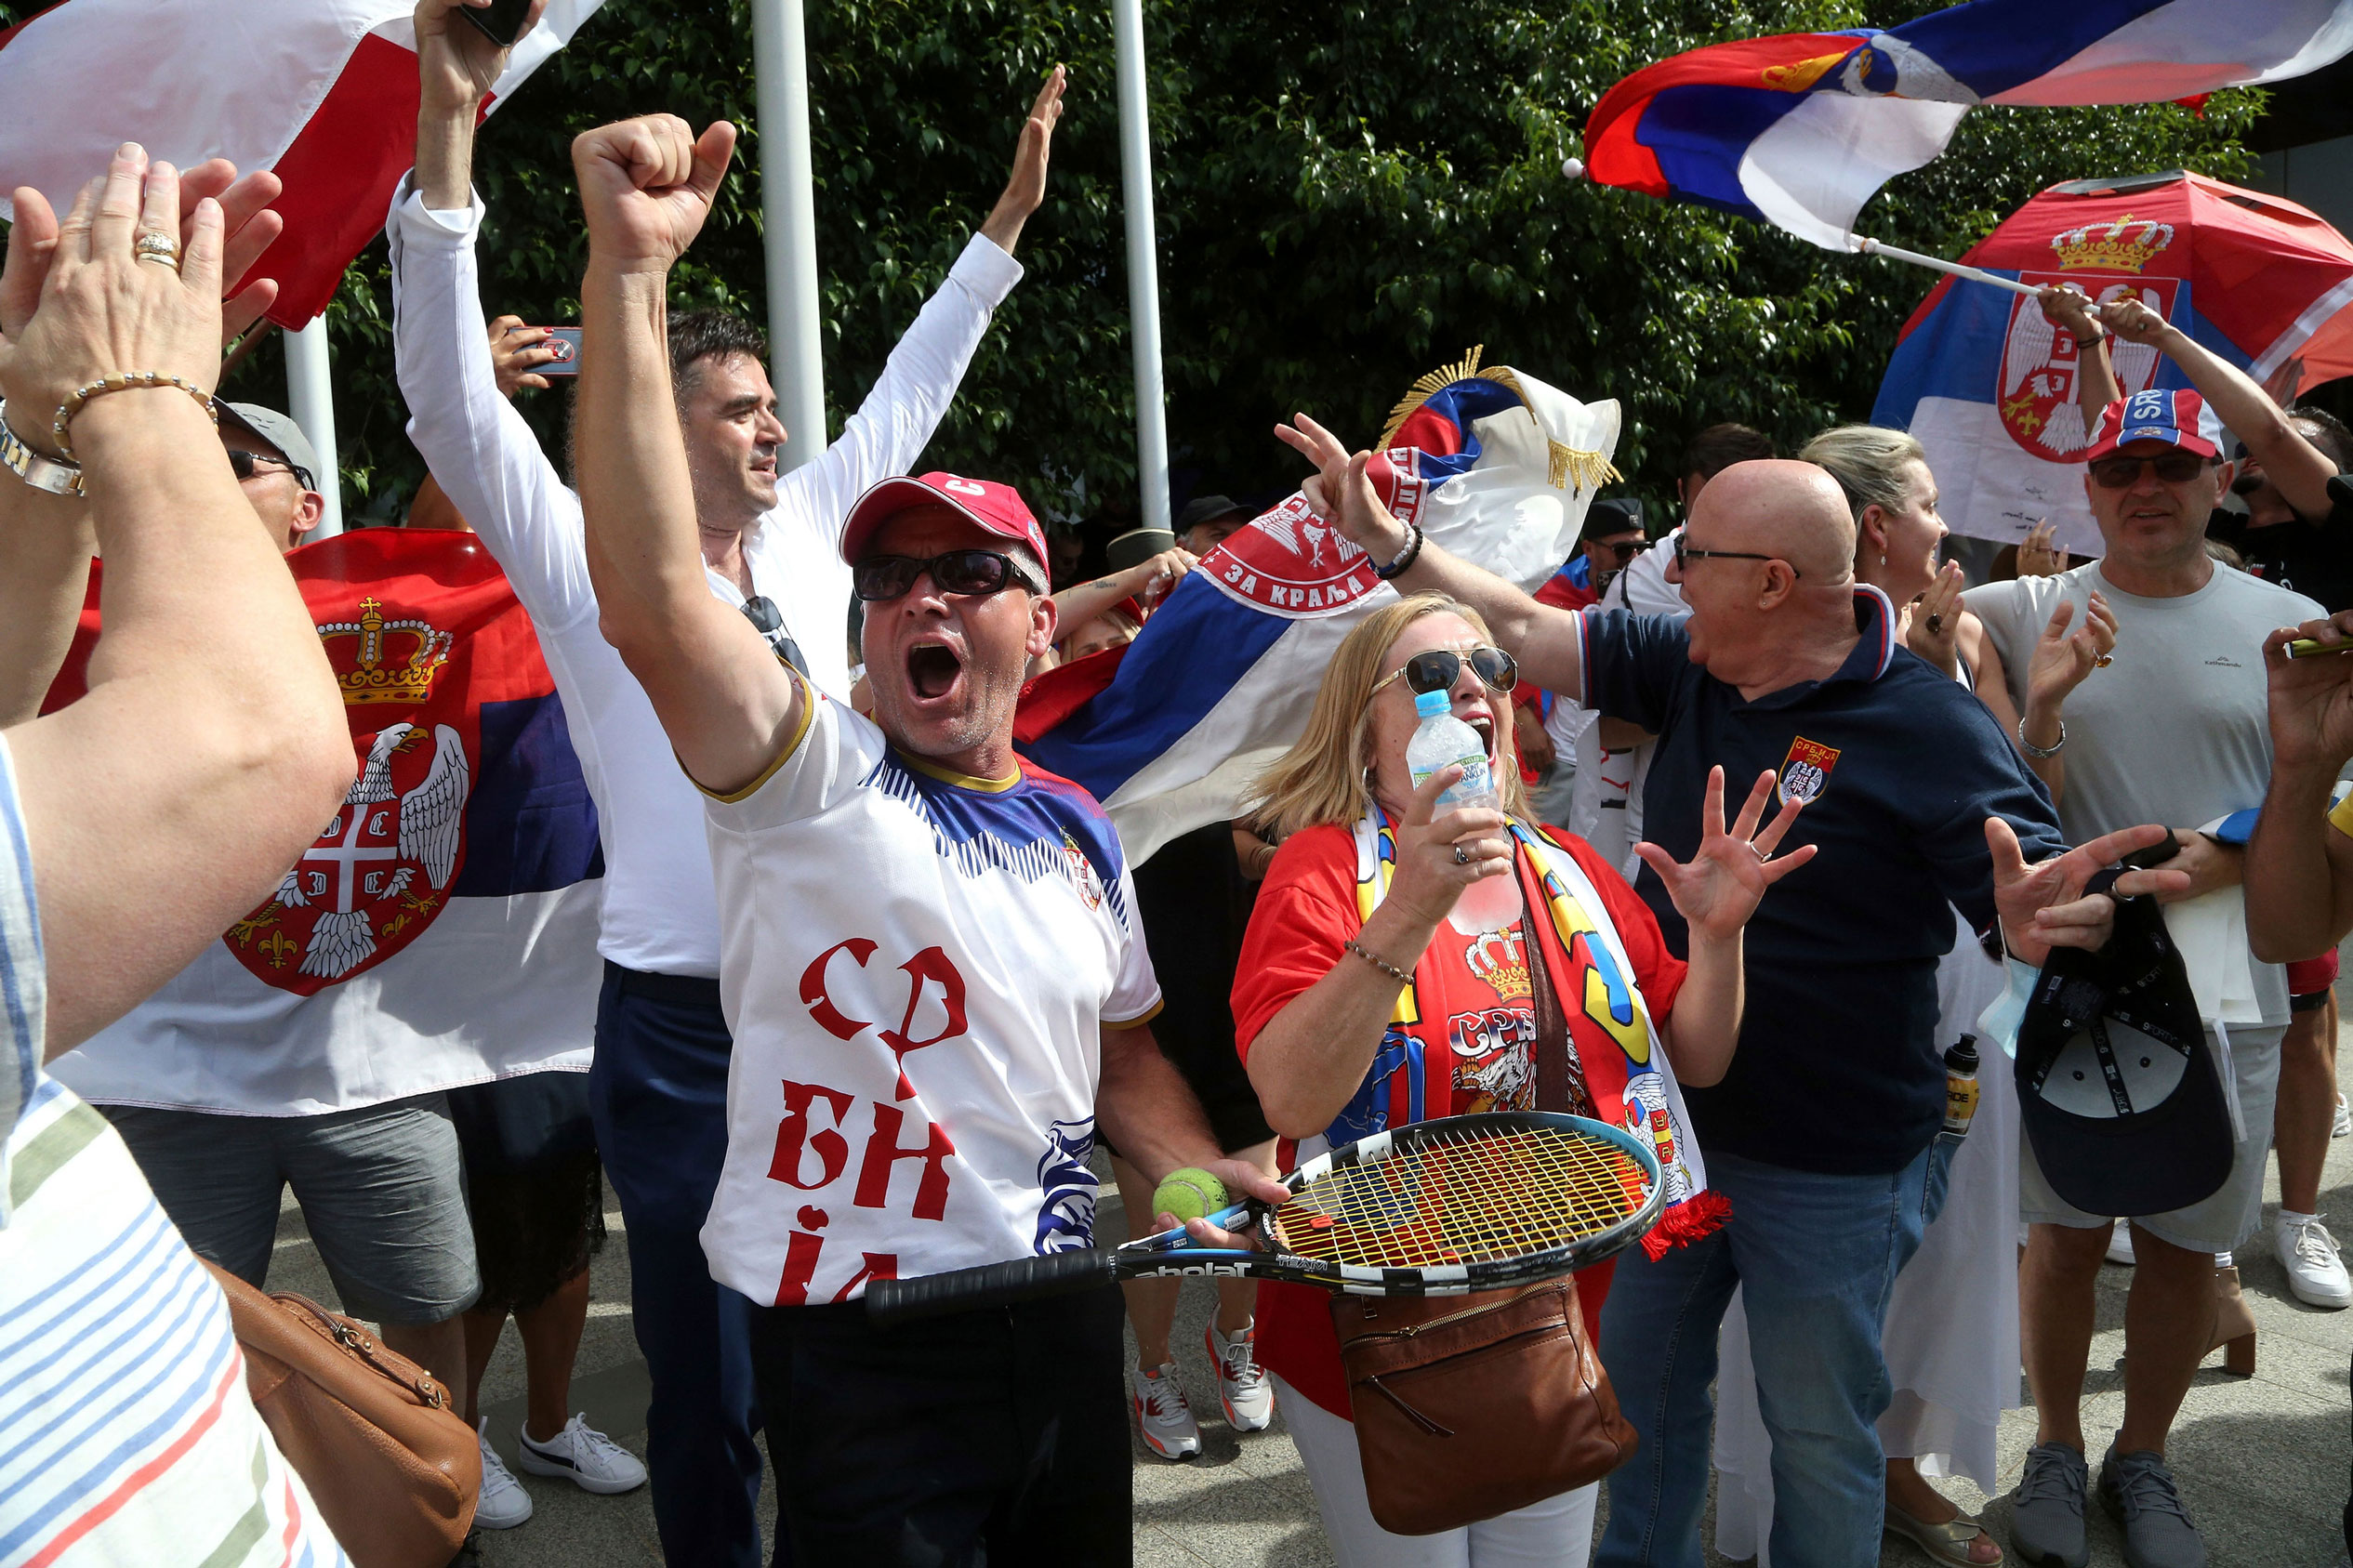 Fans of Serbian tennis star Novak Djokovic react to news of his overturned ruling outside Federal Court ahead of the Australian Open in Melbourne, Australia, Monday.